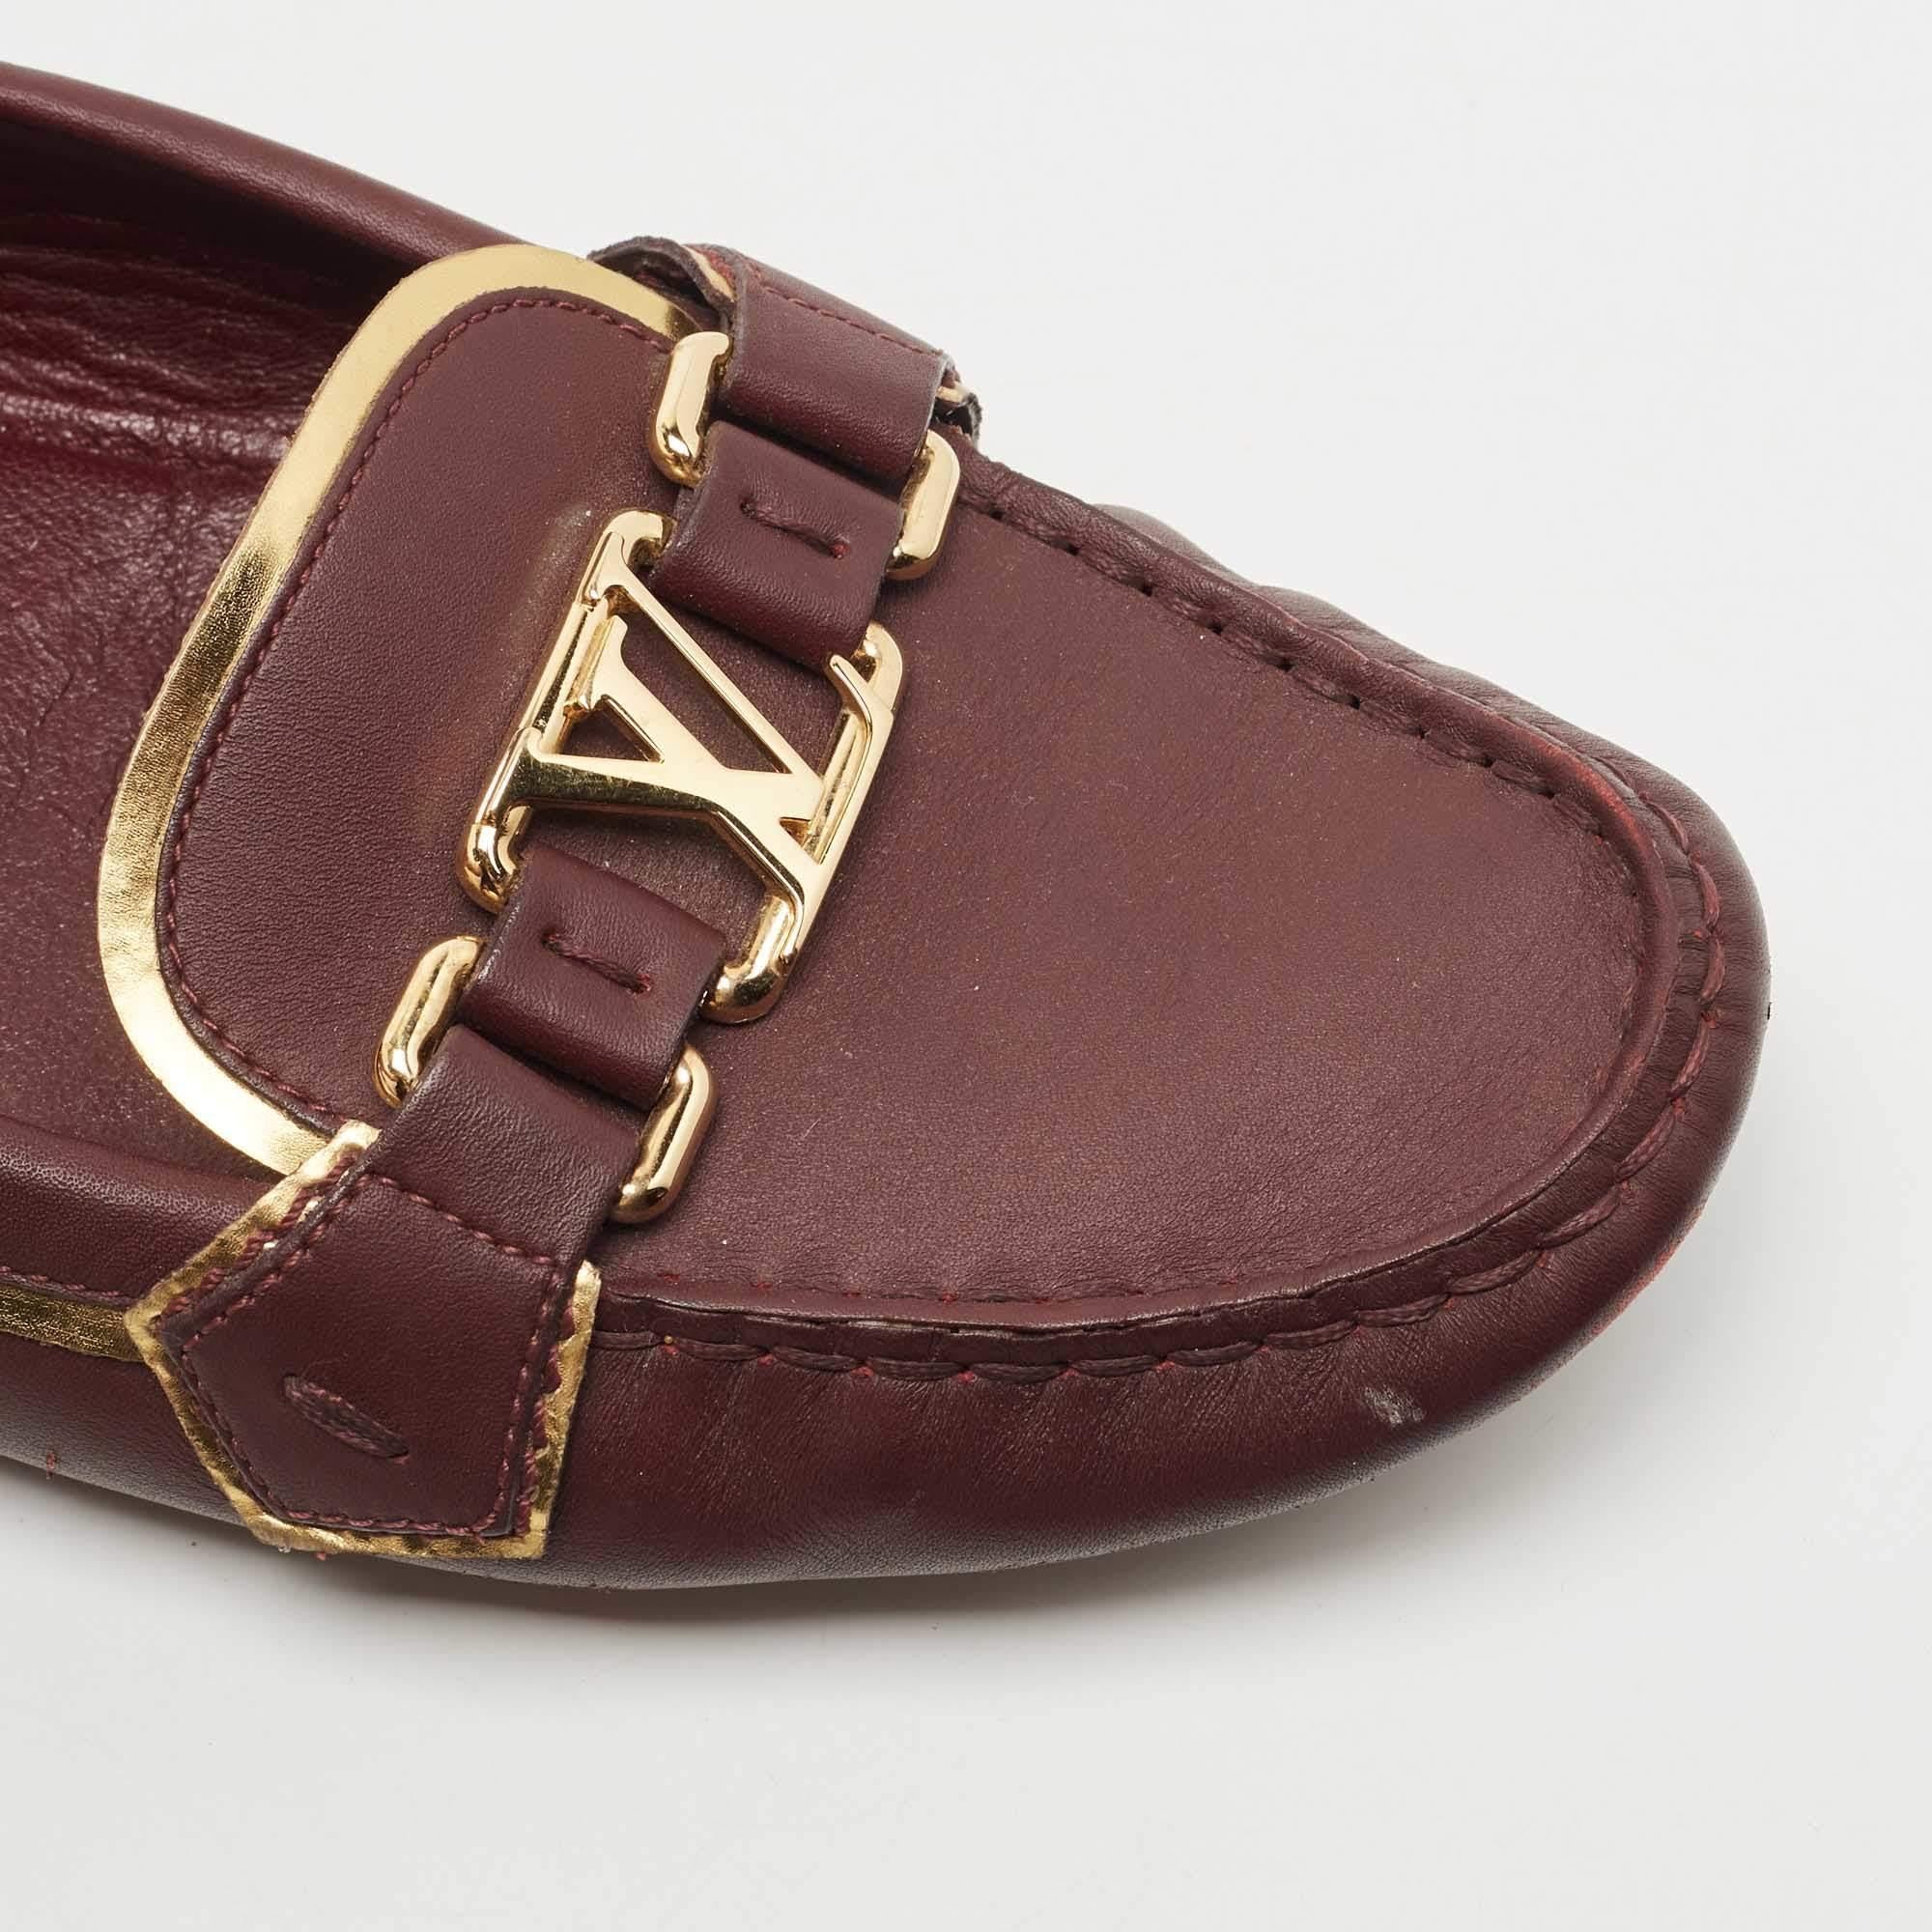 Louis Vuitton Burgundy/Gold Leather Oxford Loafers Size 41 3